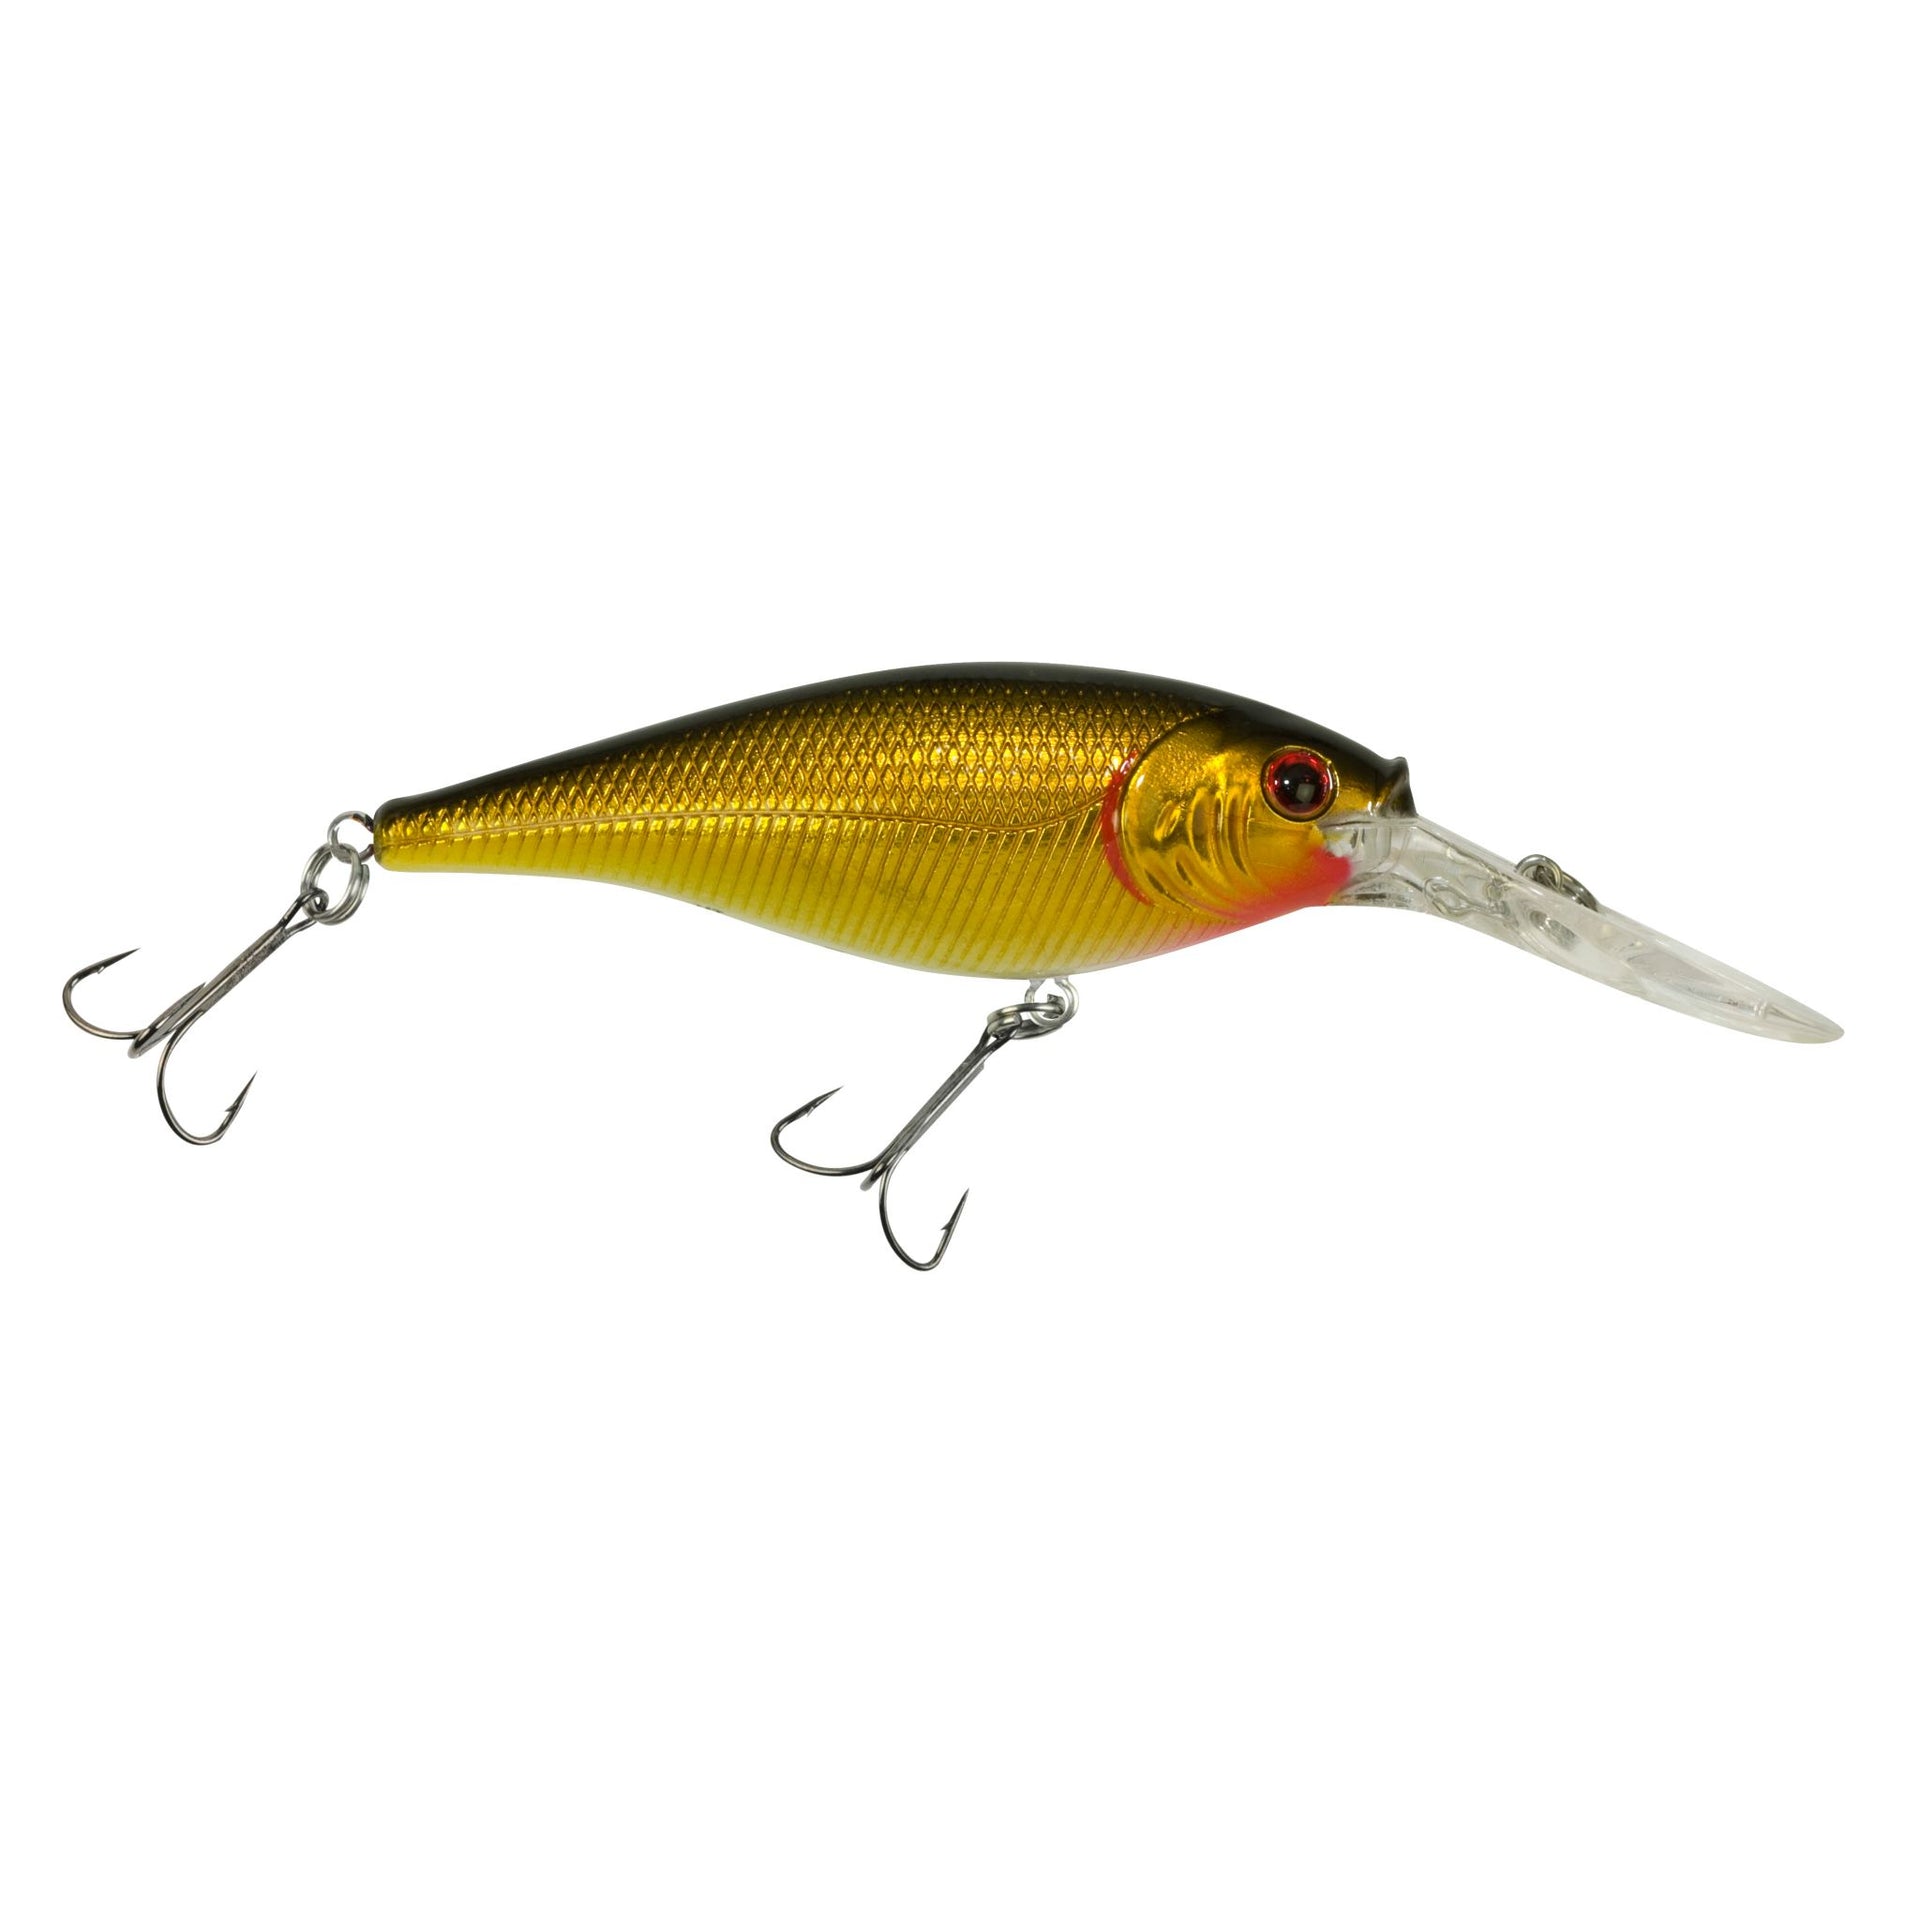 Flicker Shad 7 Shallow Blue Tiger 3-6' - Zone Chasse et Pêche